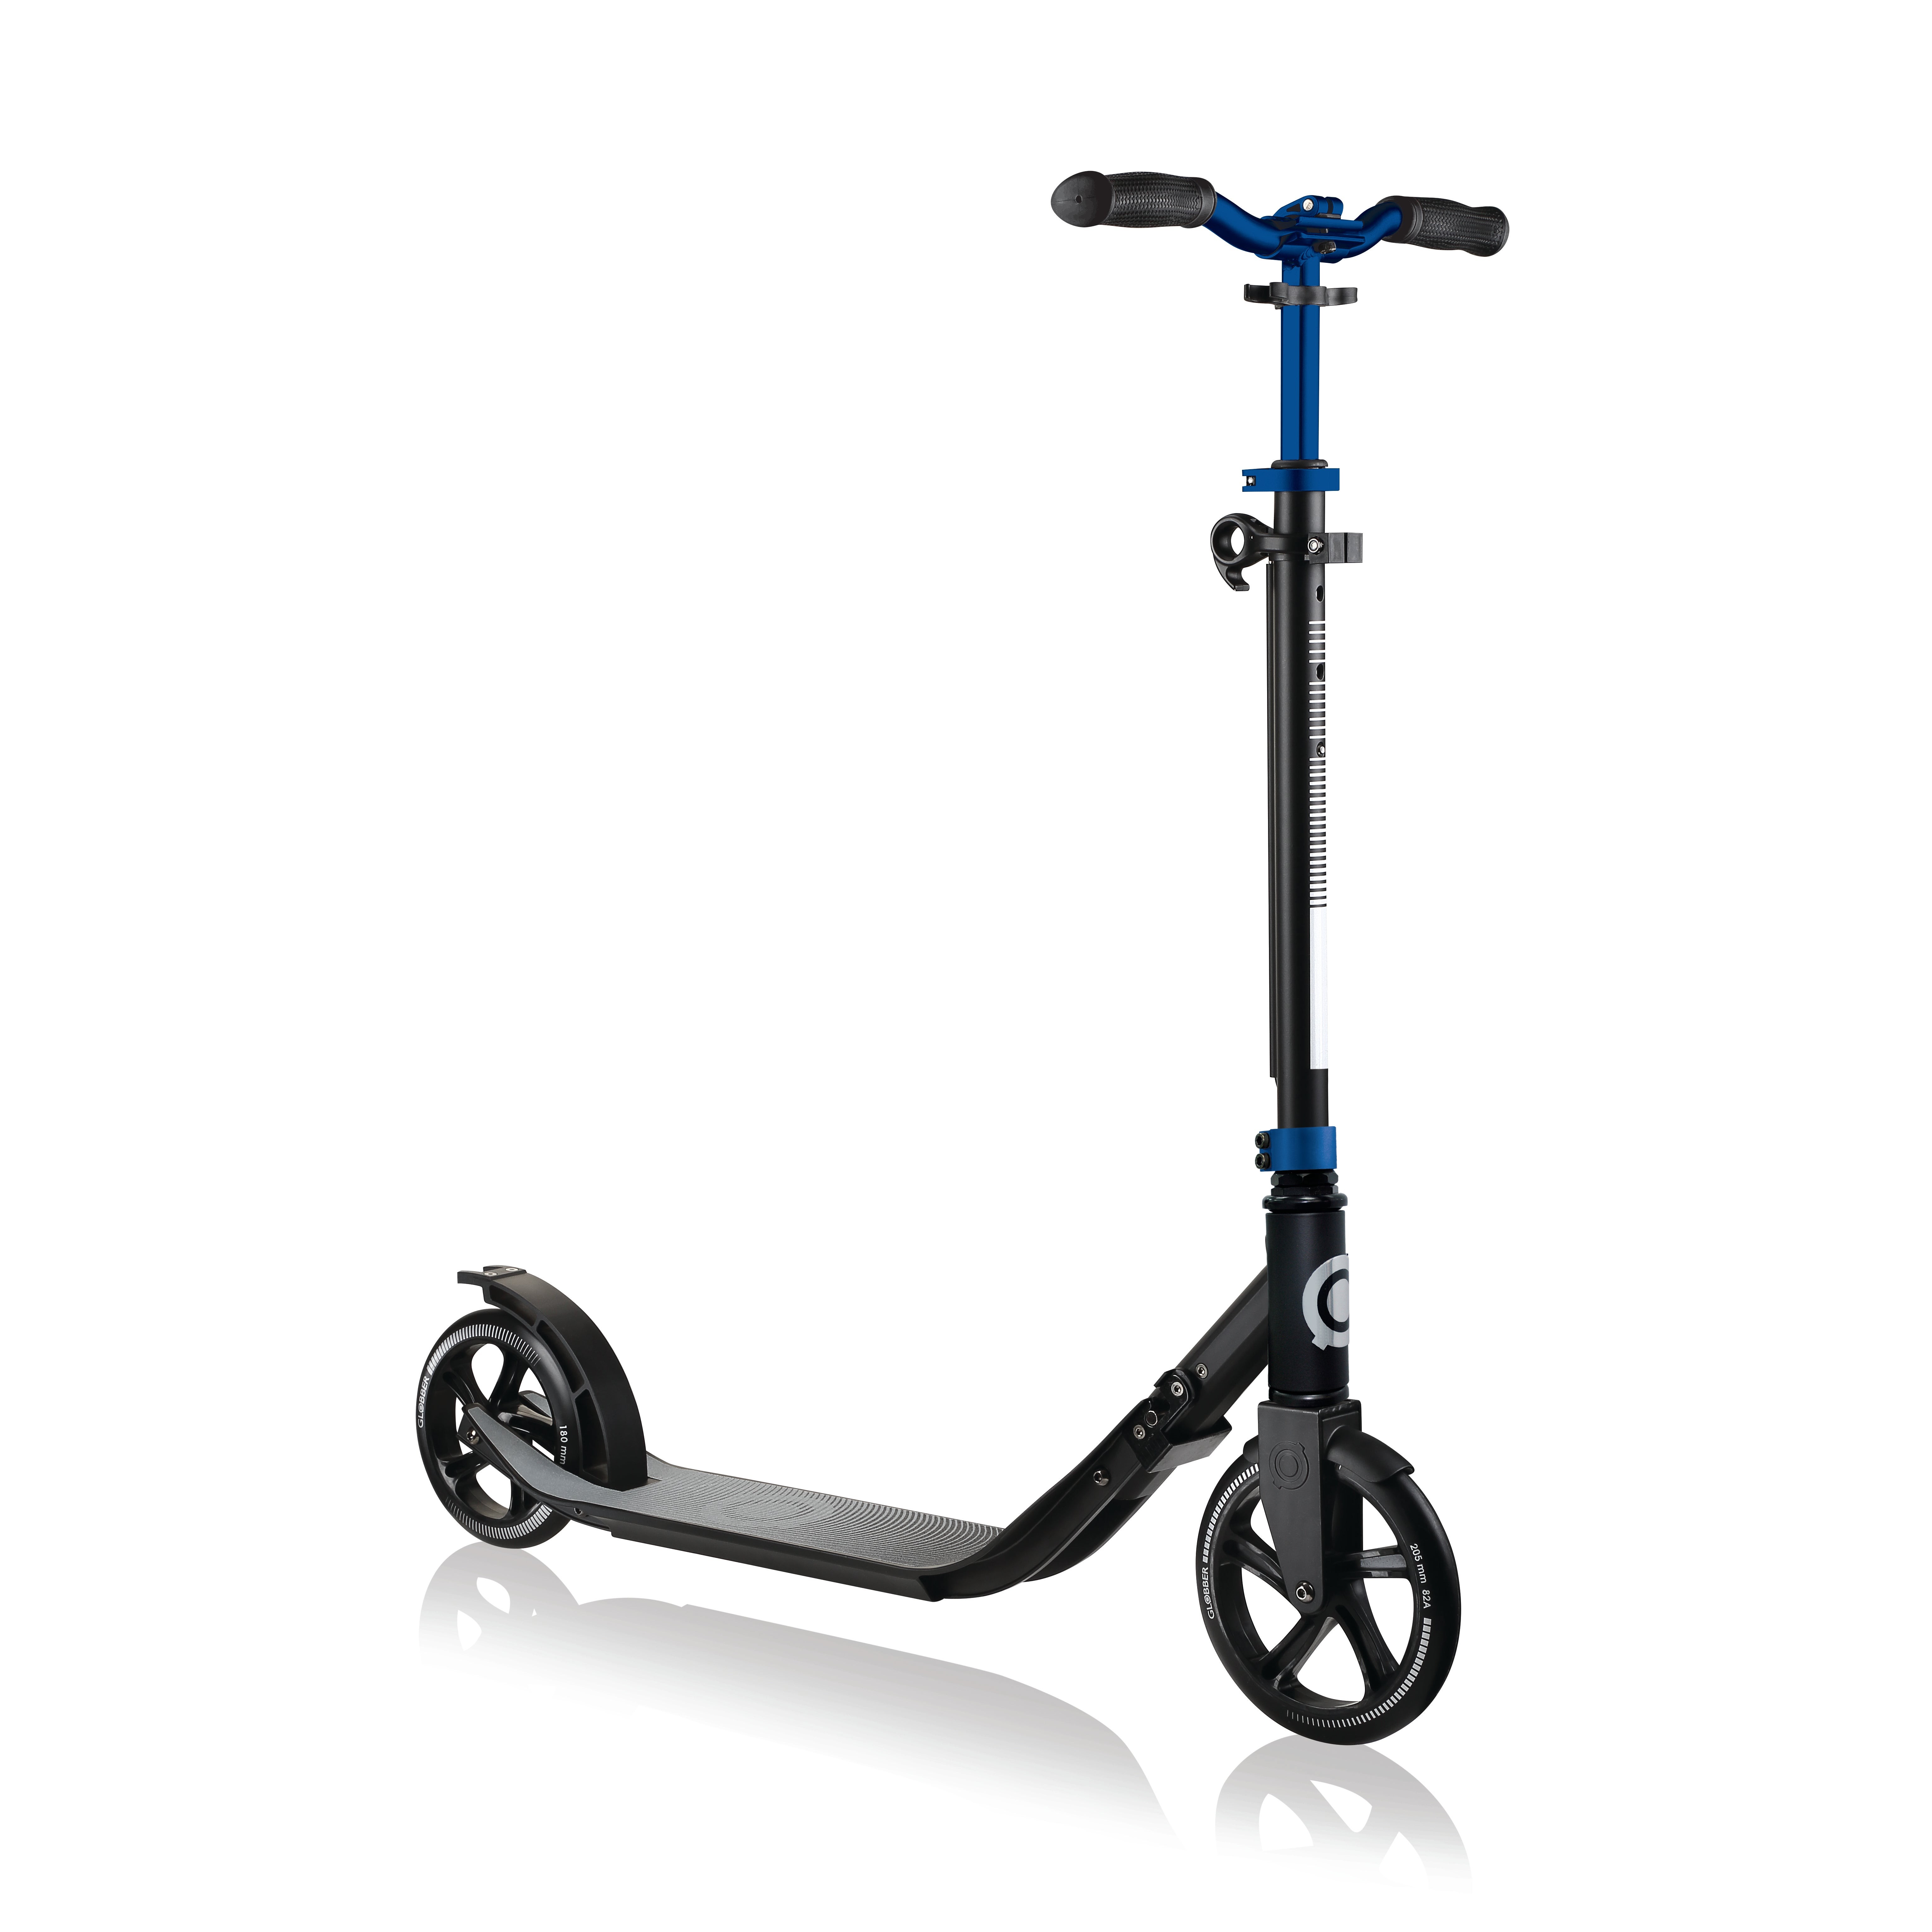 One NL 205-180 Duo Height Adjustable Scooter for Adults Cobalt Blue